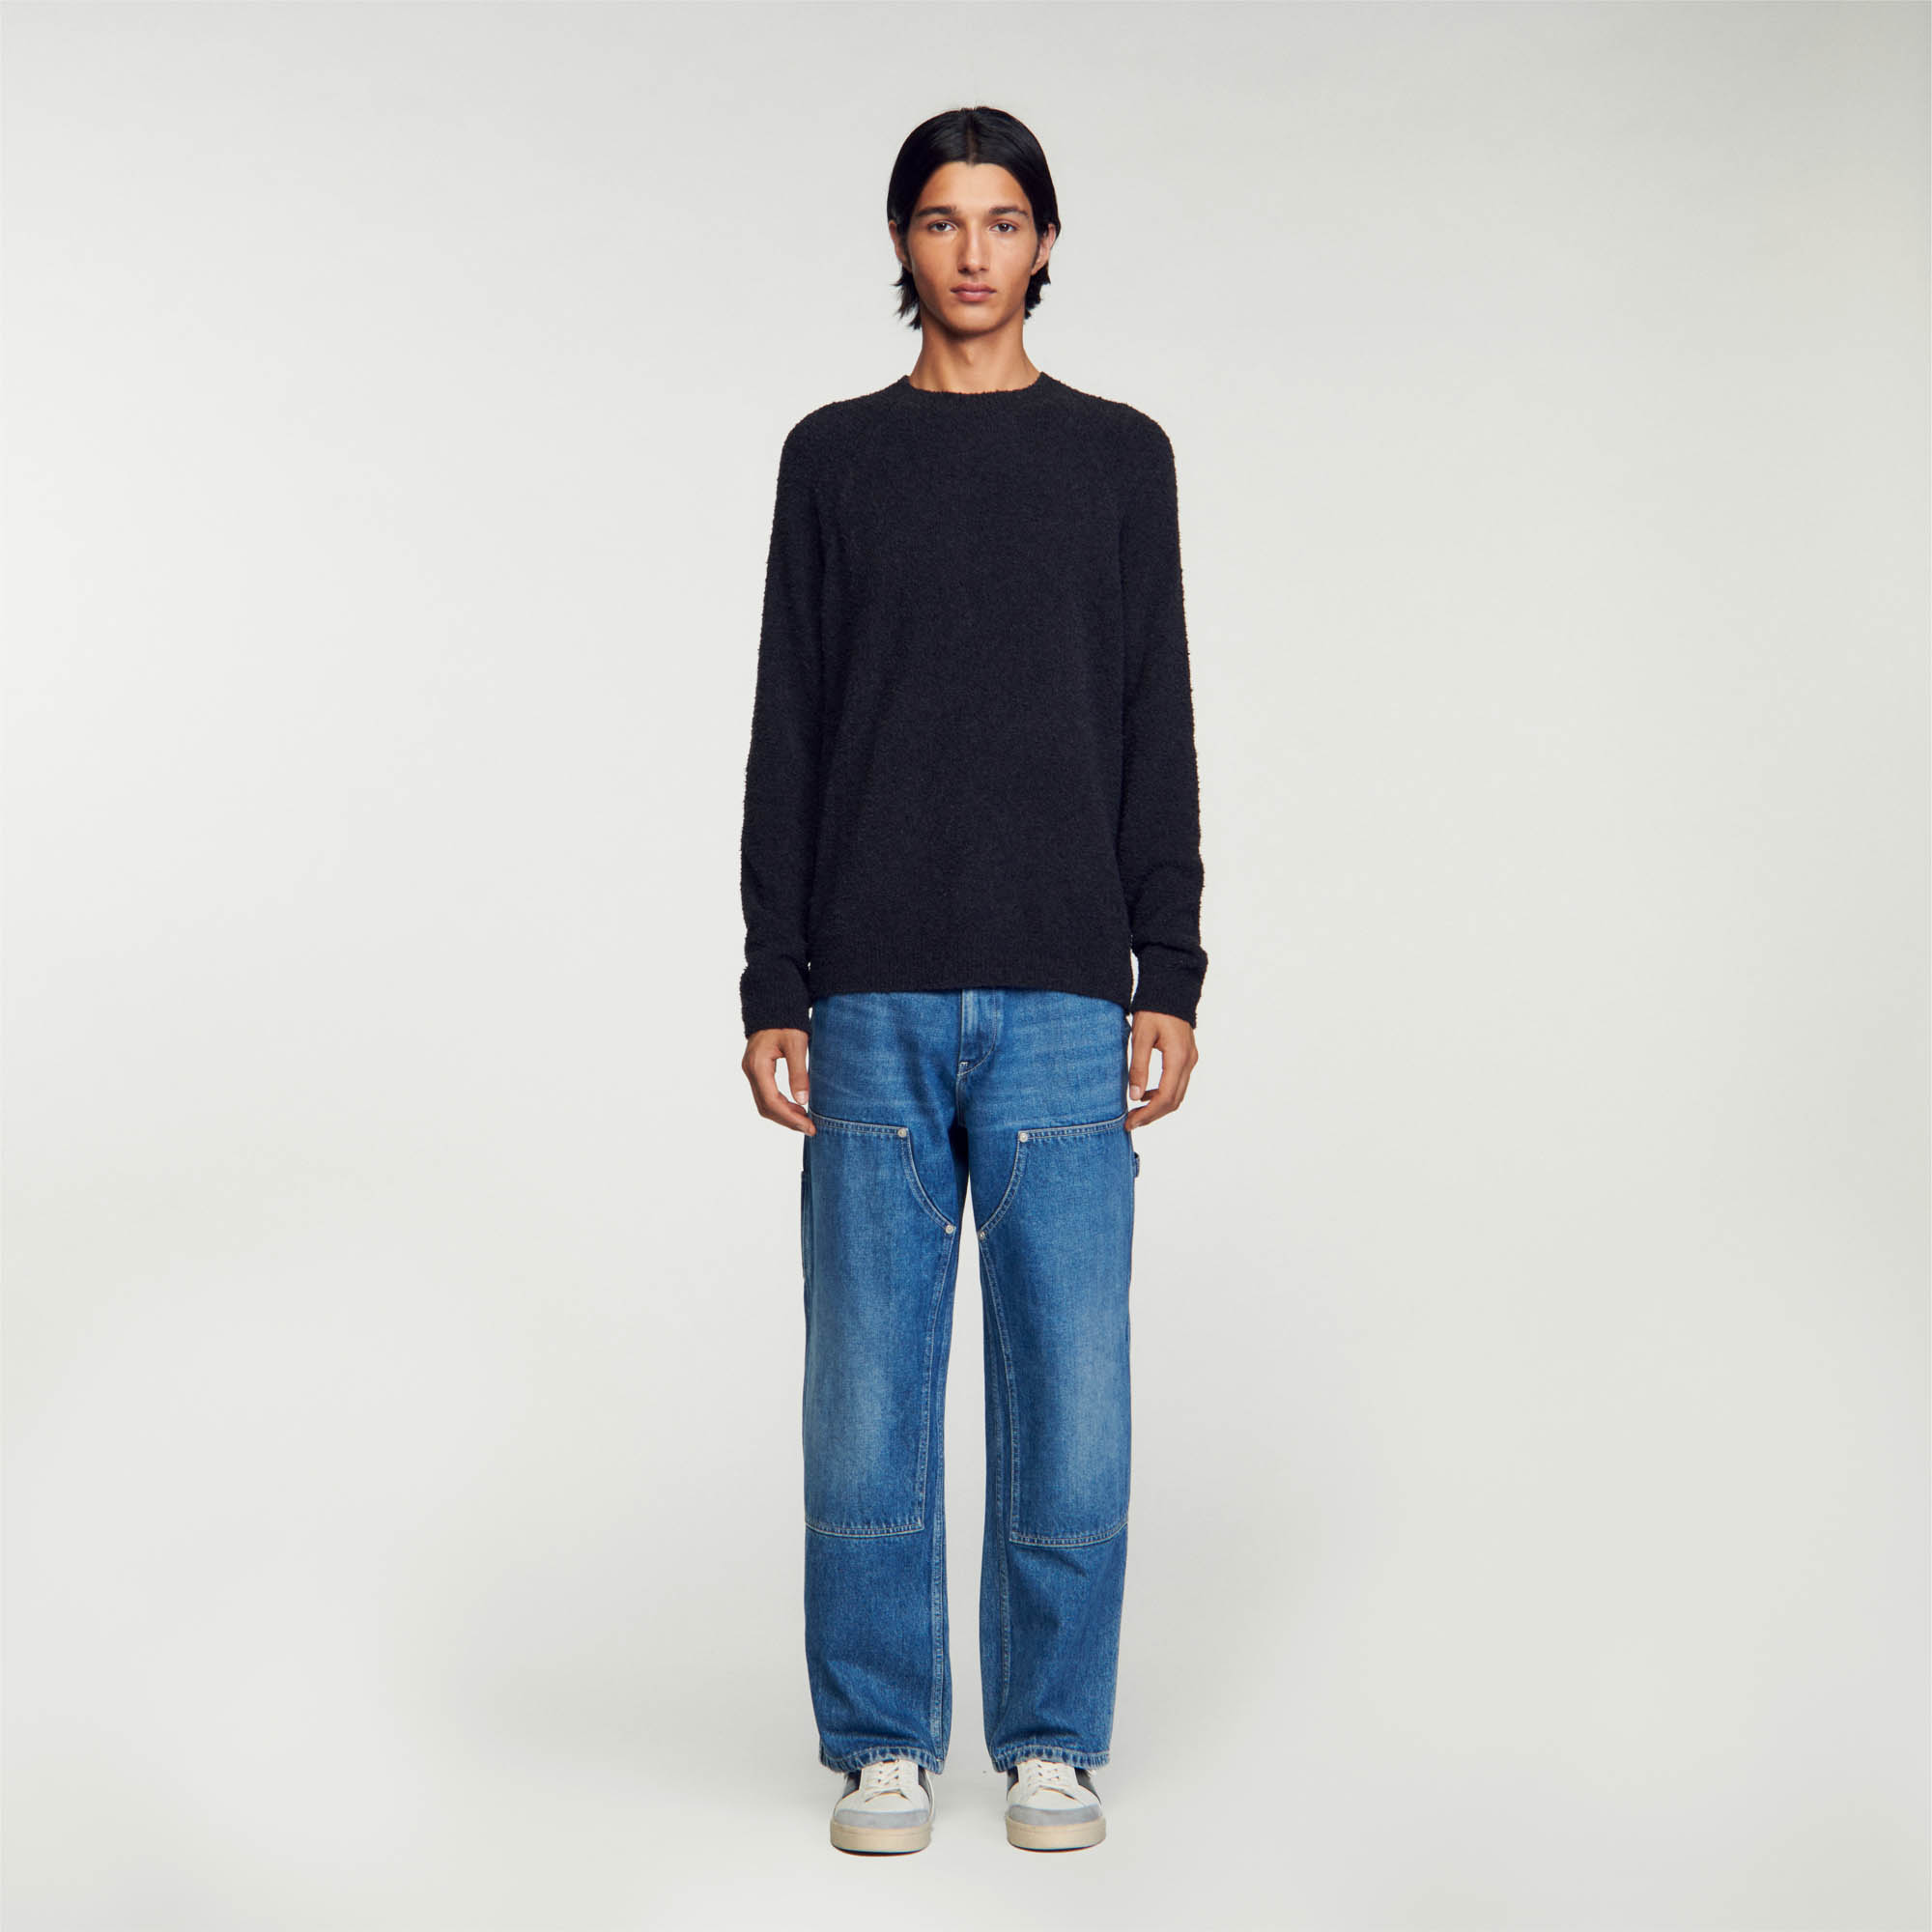 Sandro cotton Knit sweater with a wide round neck and long sleeves